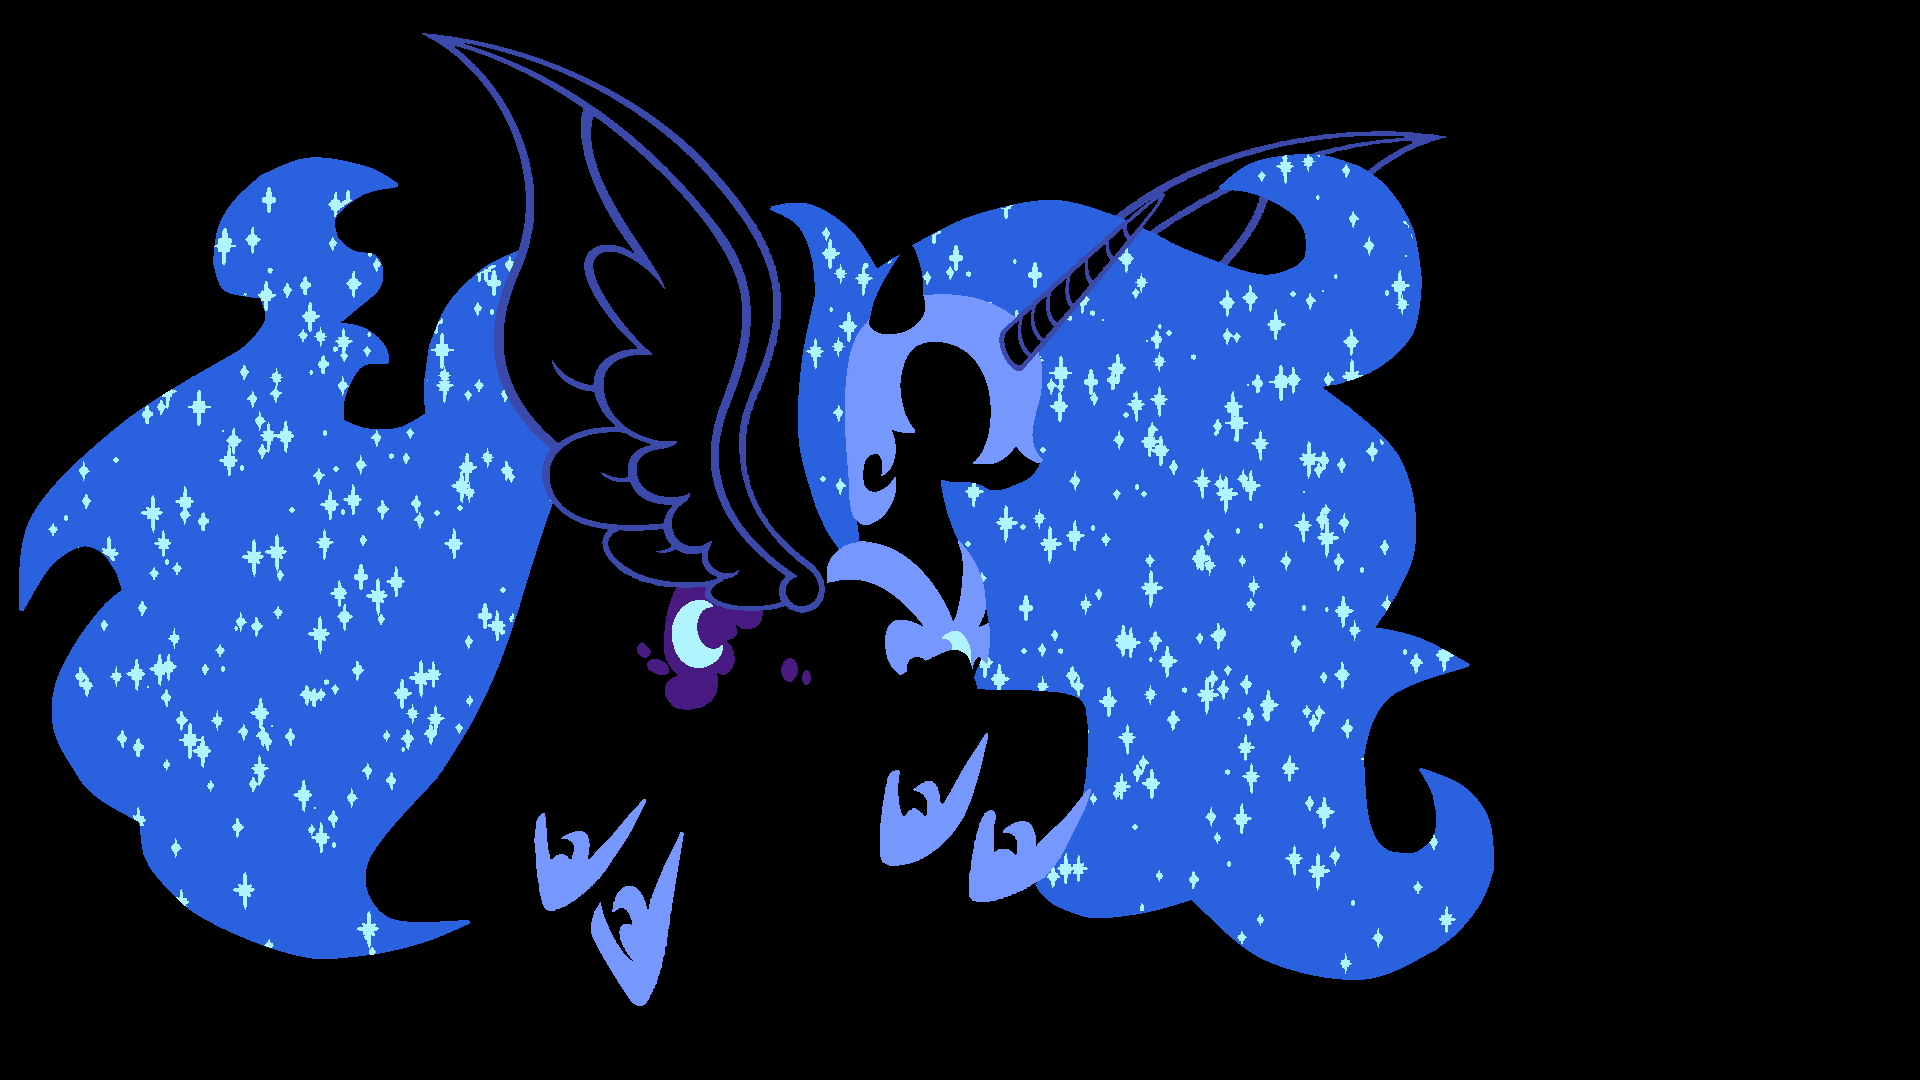 Nightmare Moon Wallpaper by Blackm3sh, dotrook, Kitana-Coldfire and MoongazePonies